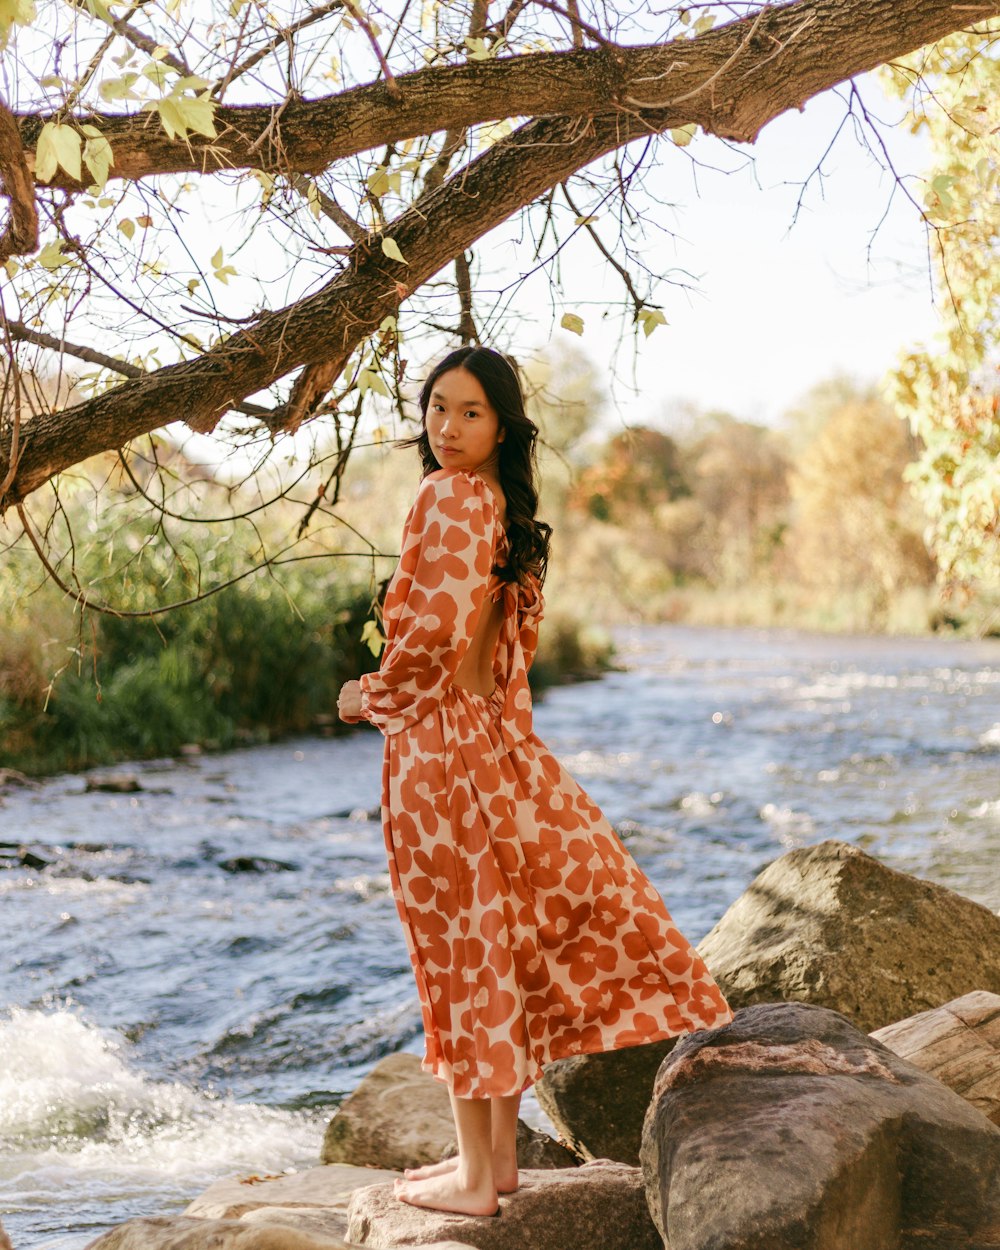 a person in a dress standing on rocks by a river